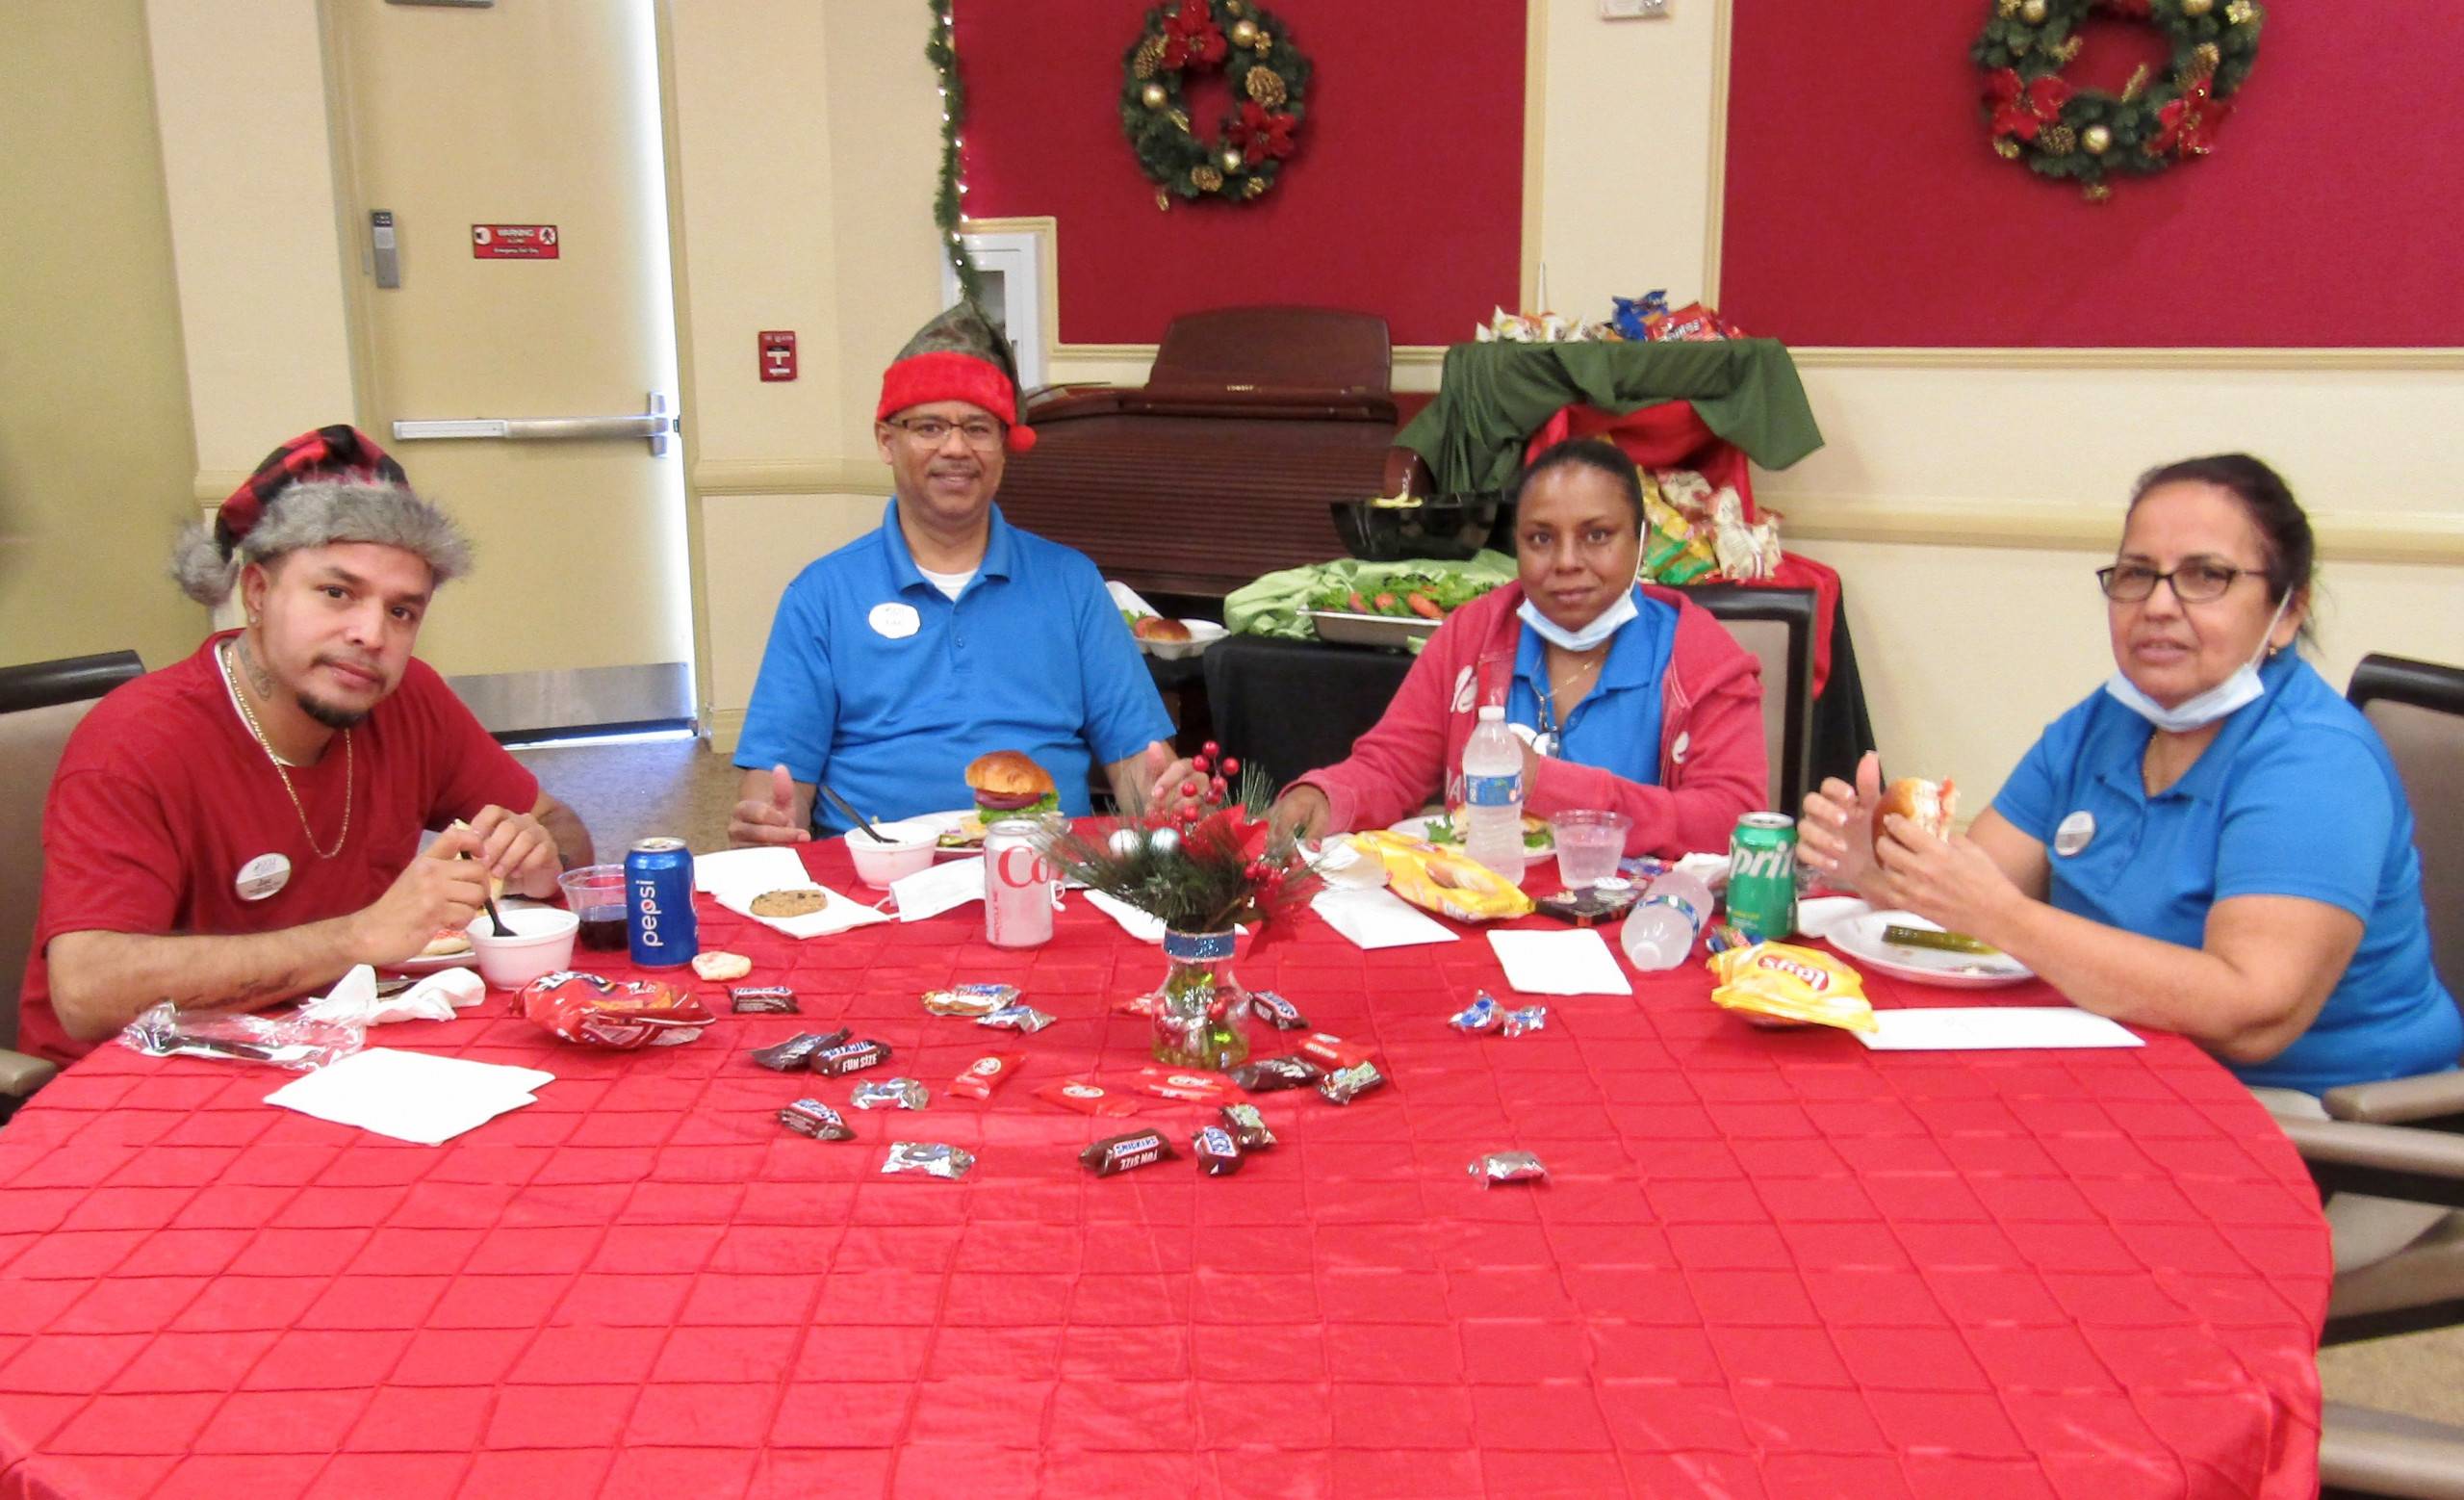 Four Gulf Coast Village staff at red holiday table